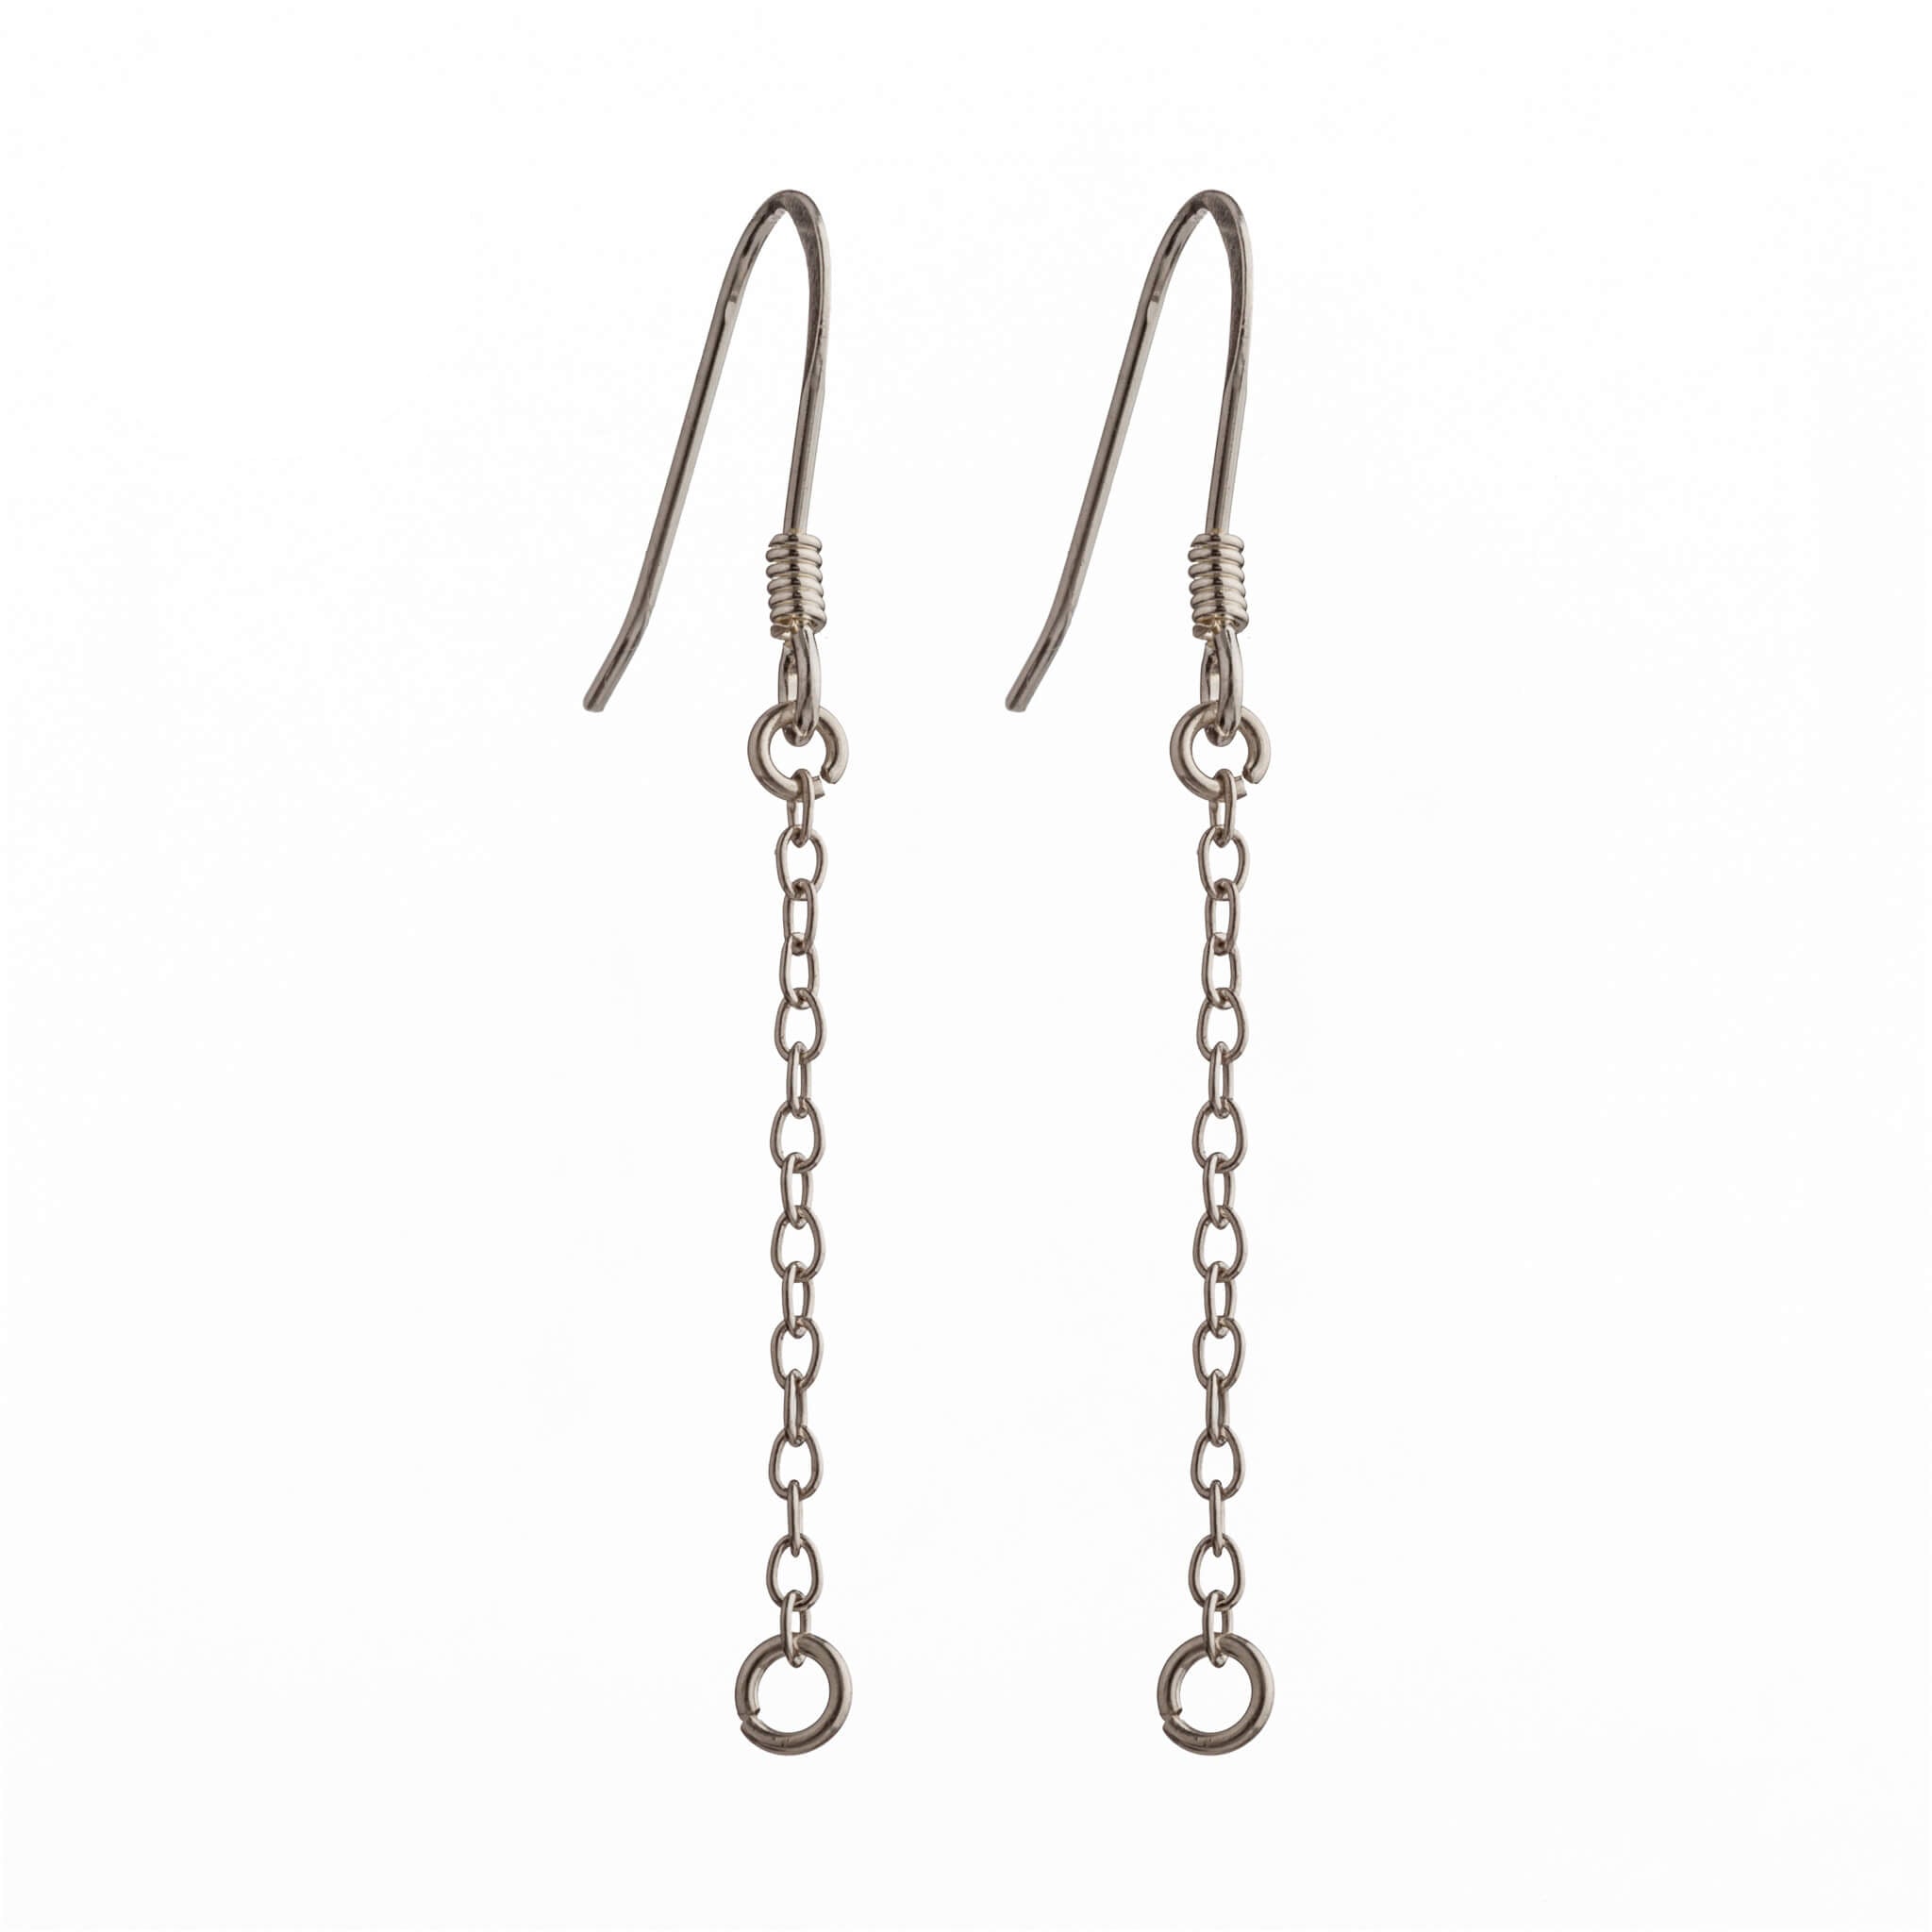 Ear Wires with Coil and Chain in Sterling Silver 7.7x40mm 23 Gauge